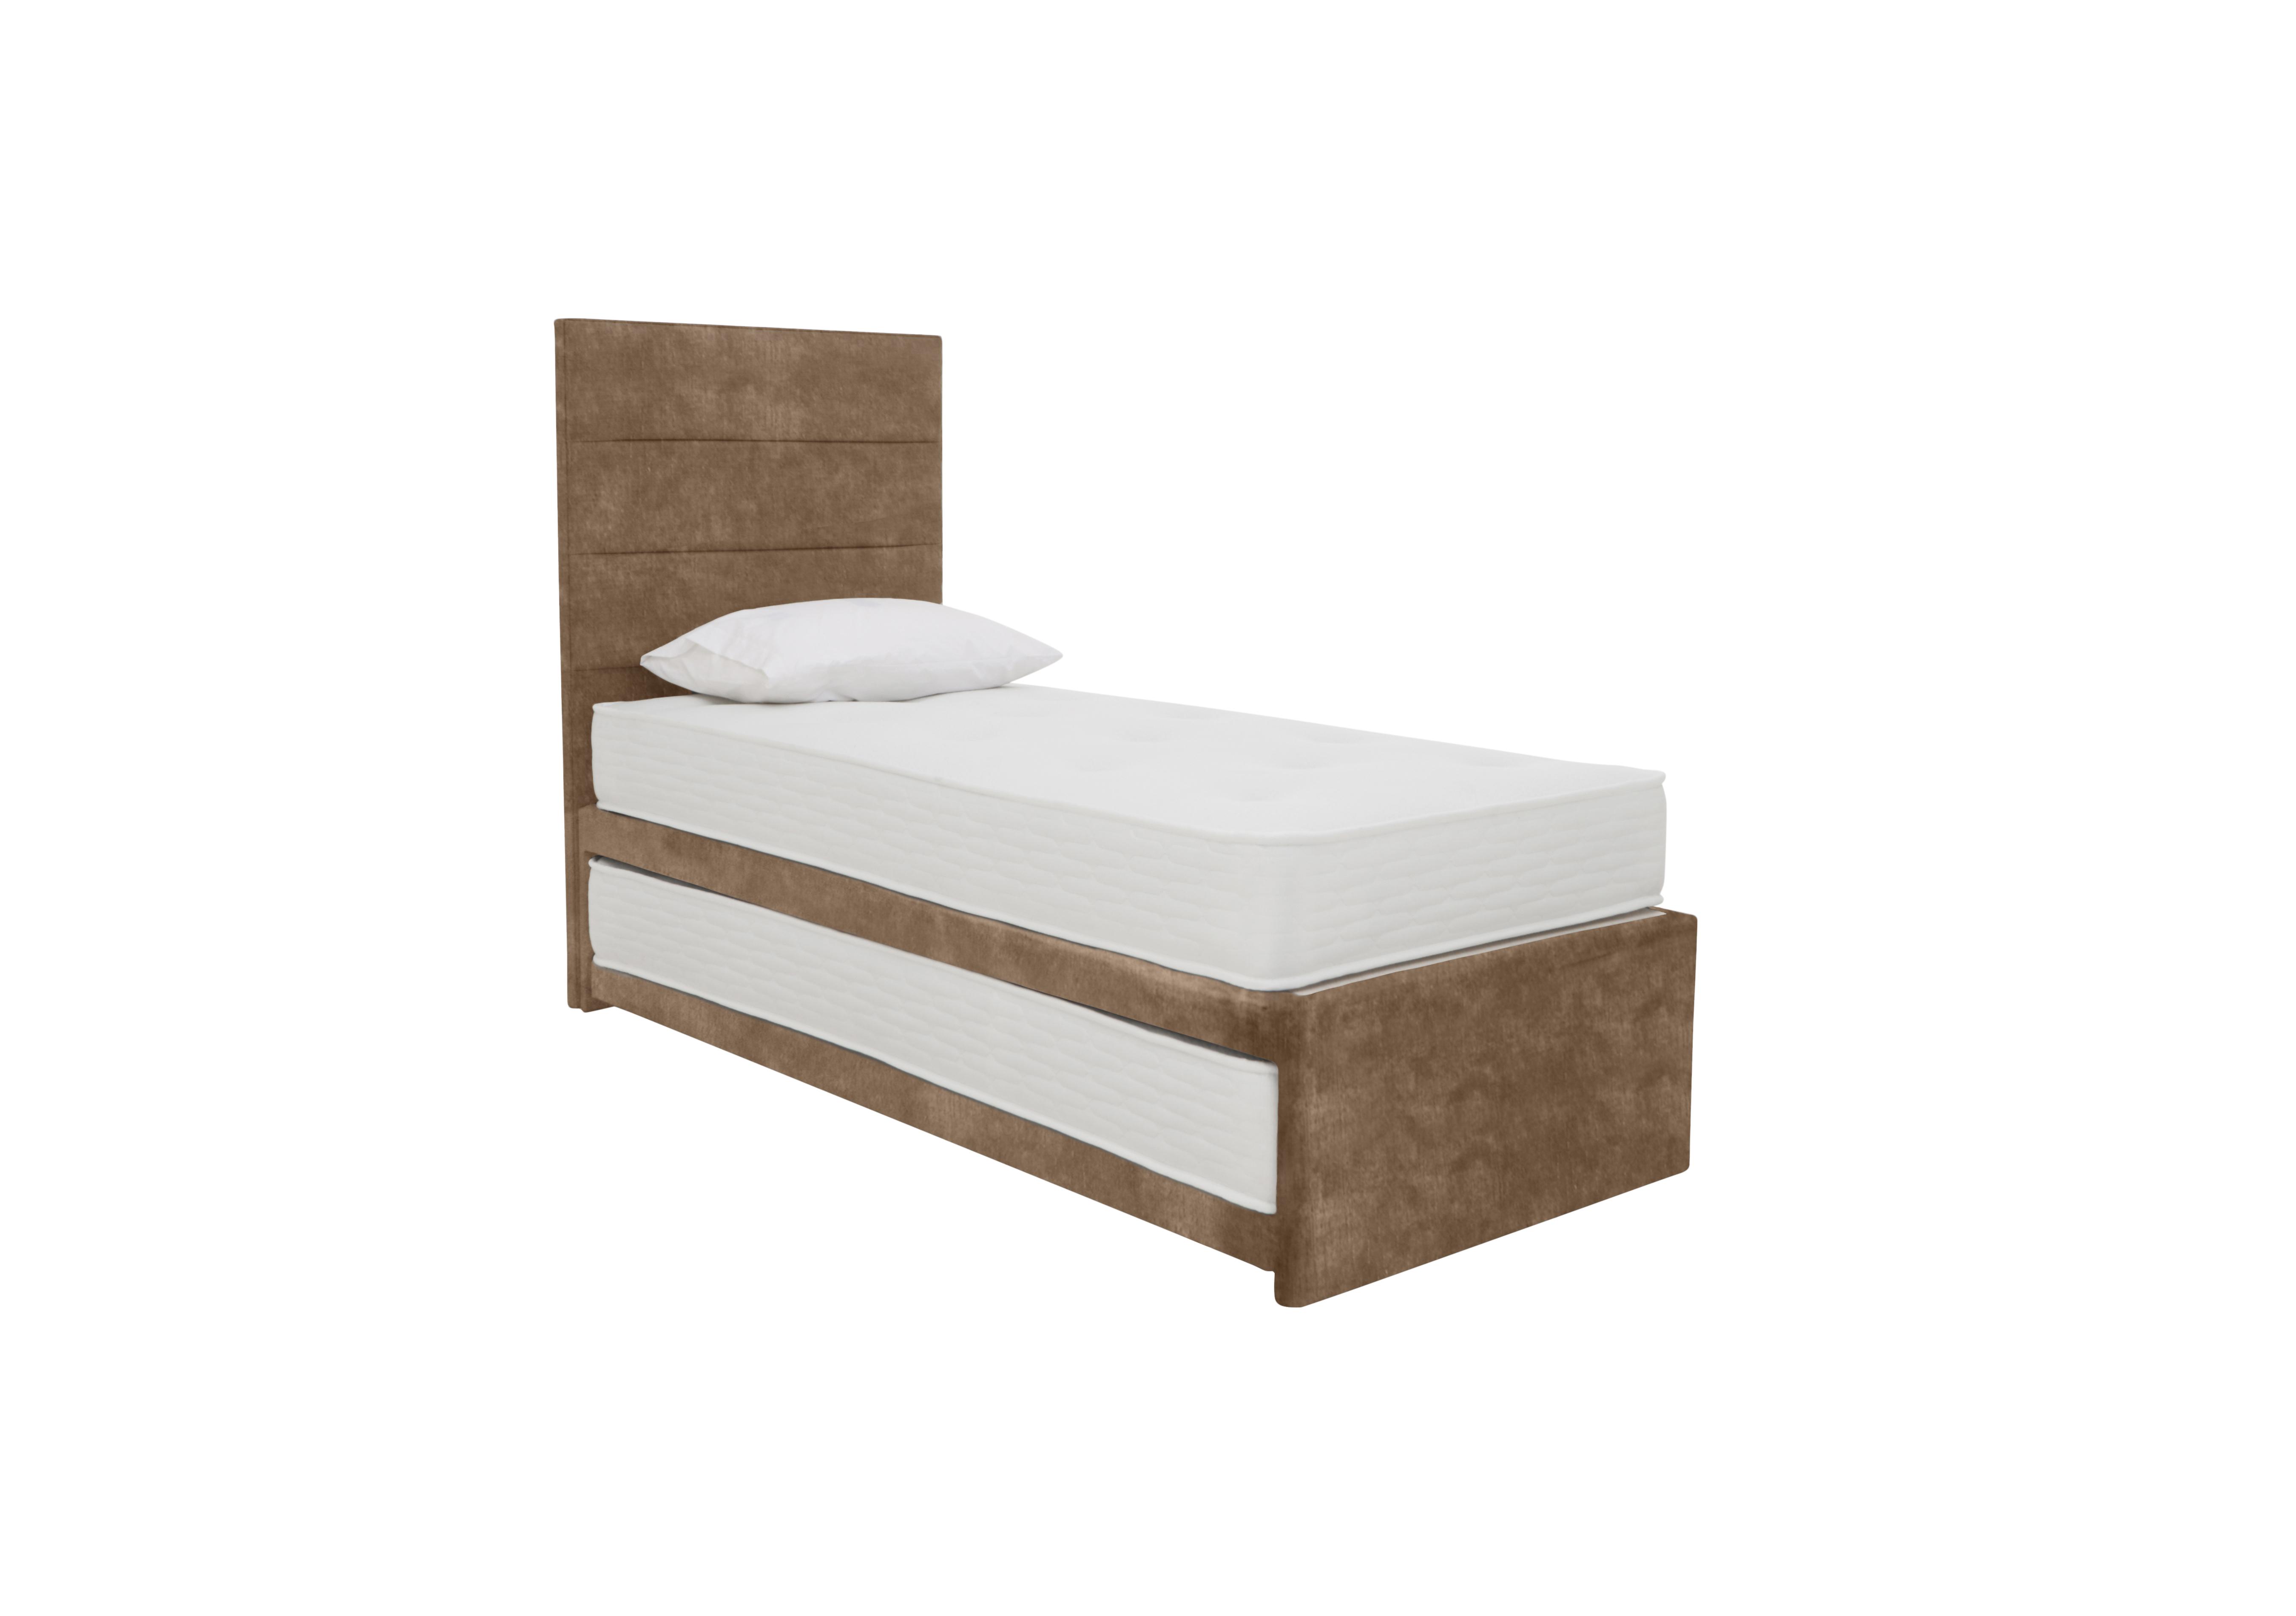 Guest Bed with Pocket Sprung Mattress in Lace Caramel on Furniture Village